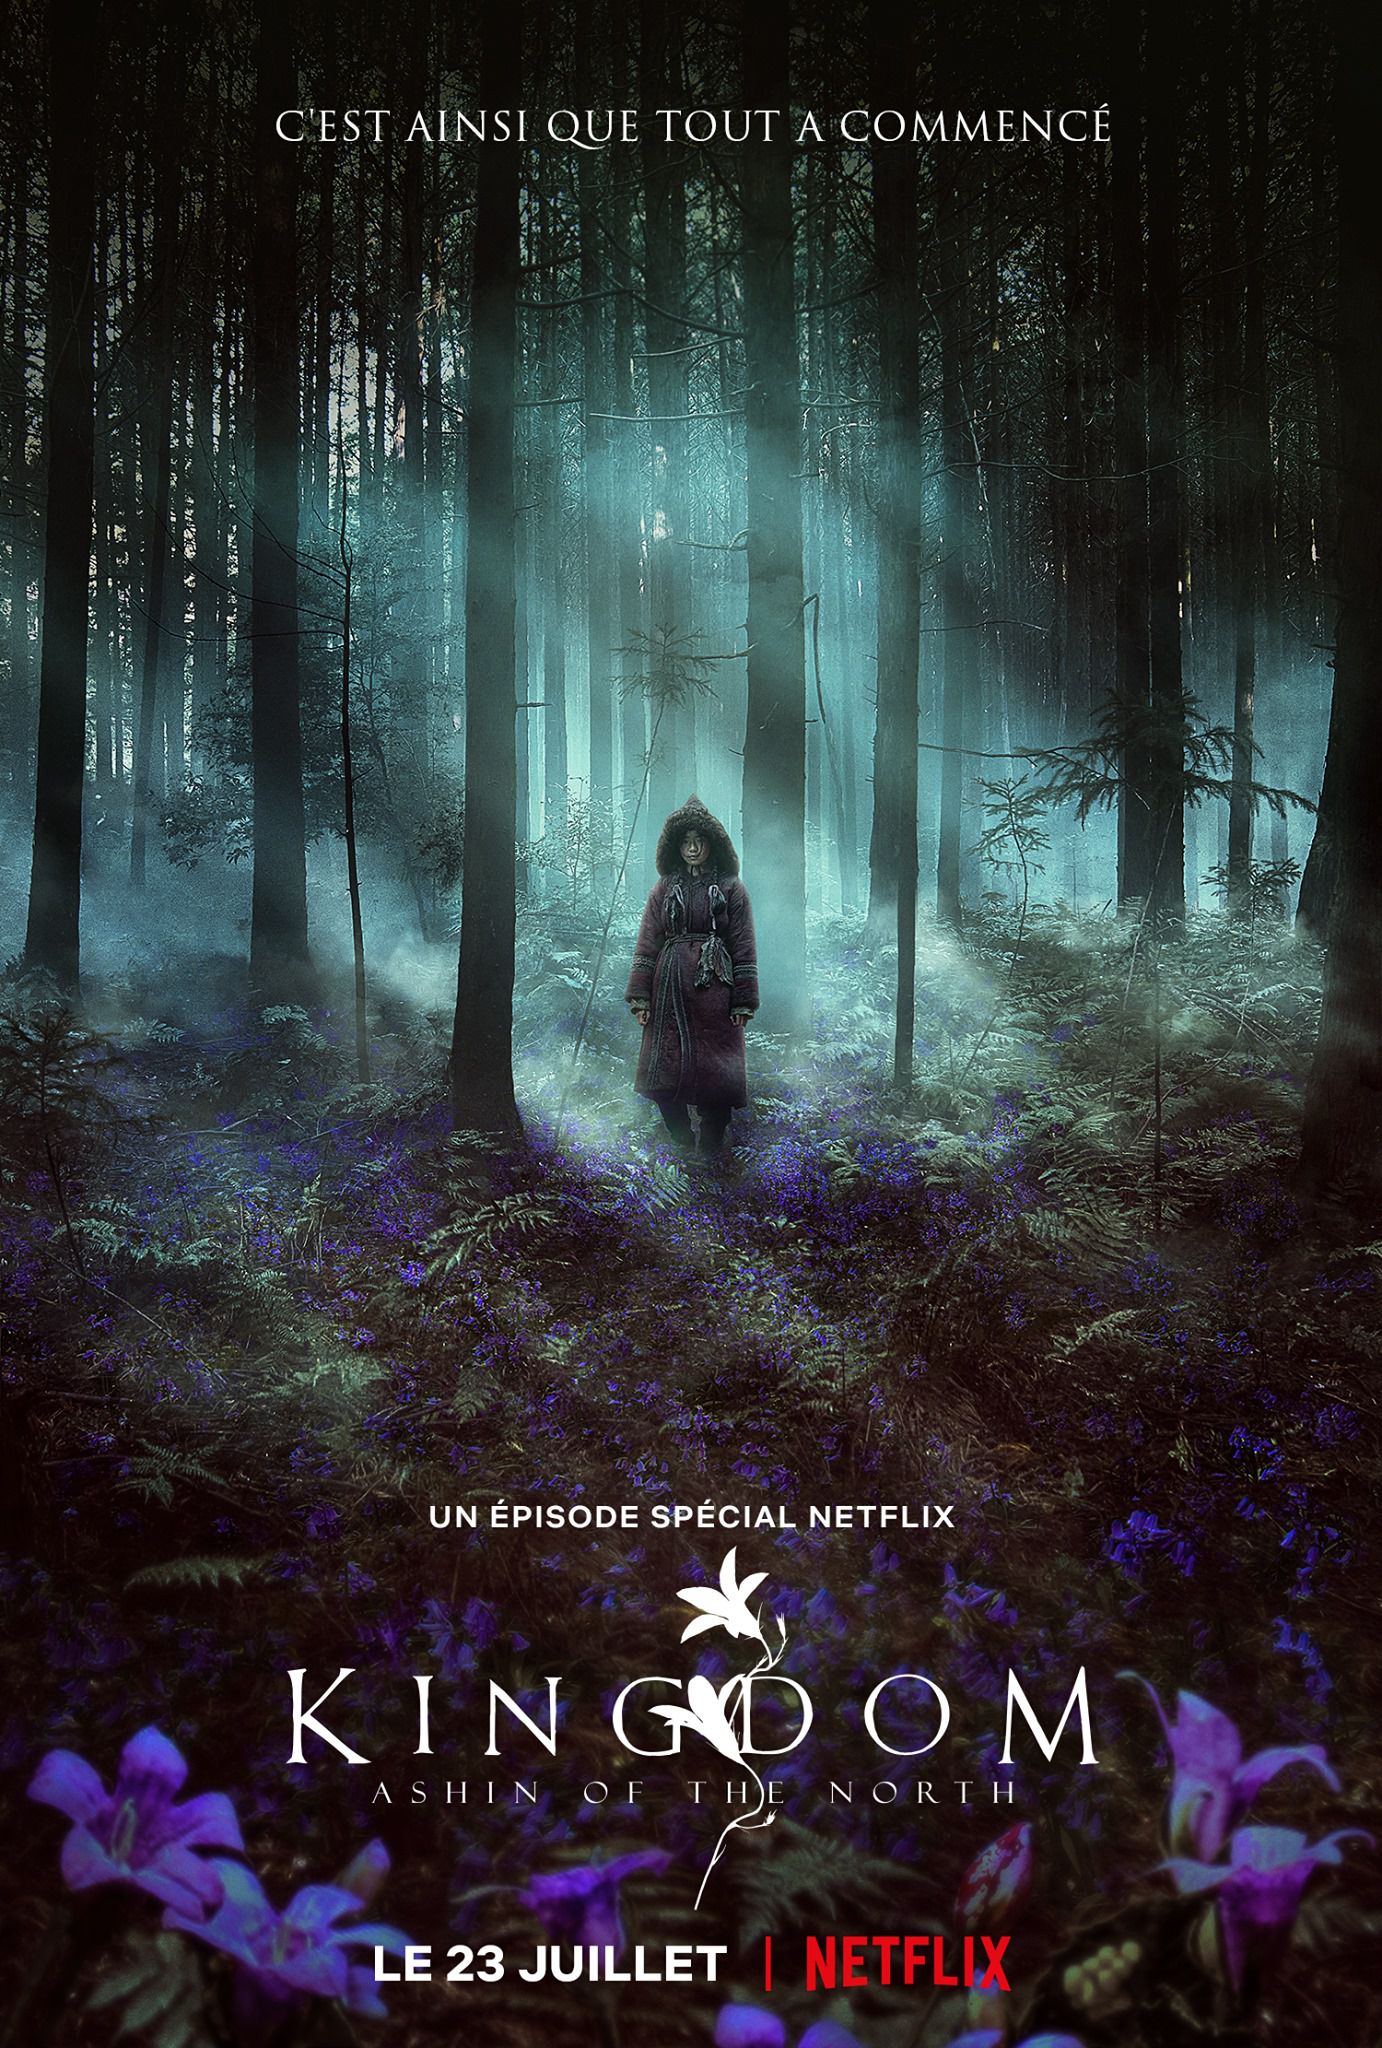 Voir Film Kingdom: Ashin of the North - Film (2021) streaming VF gratuit complet